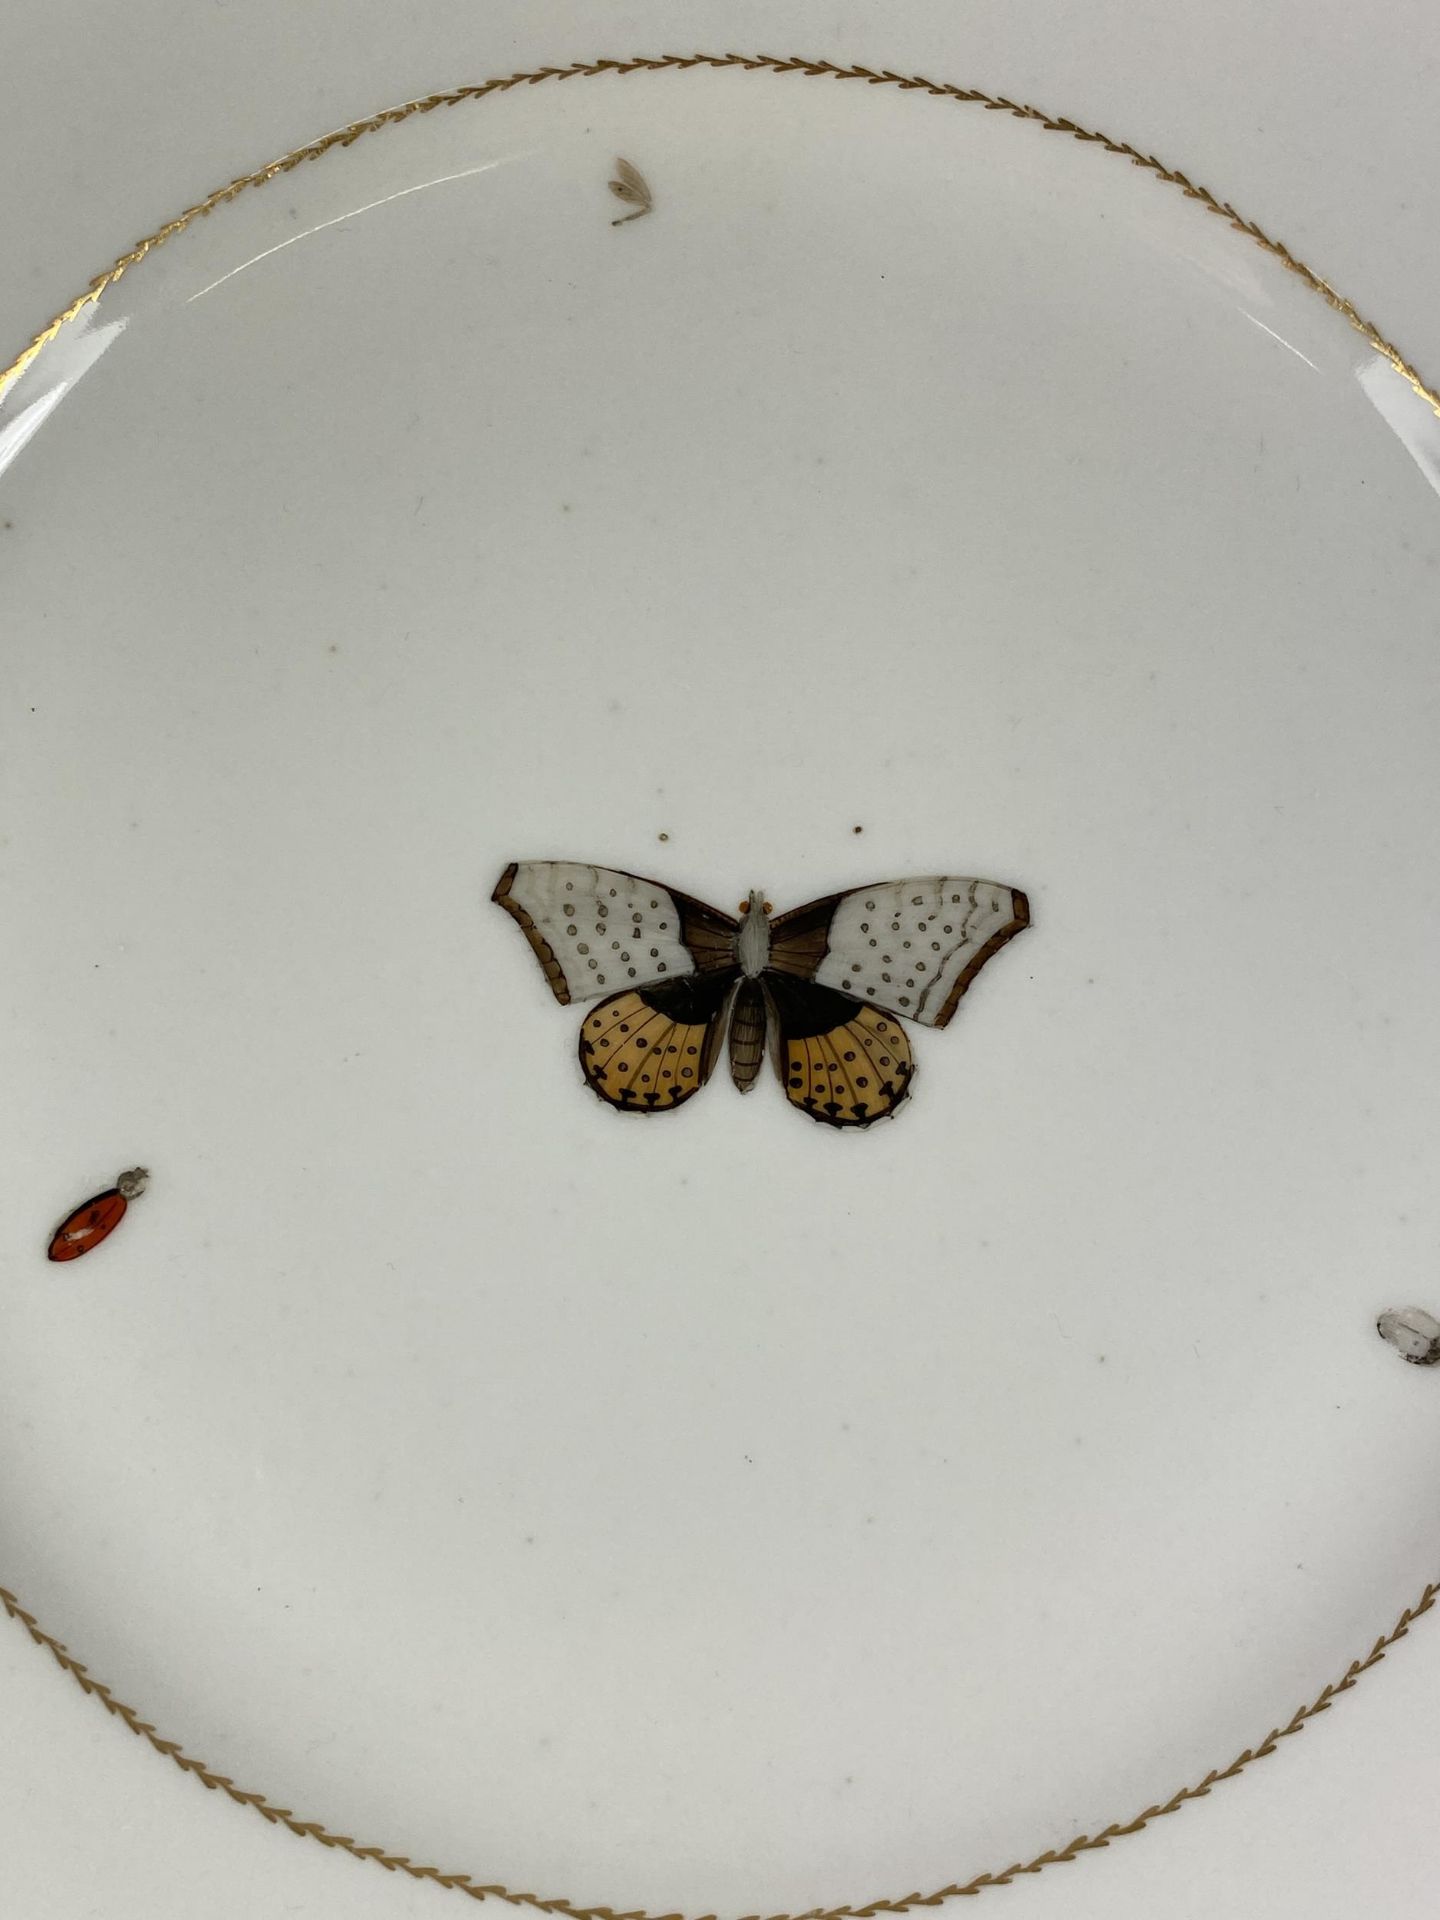 A BELIEVED CHRISTOPHER PARIS PORCELAIN C.1795 HAND PAINTED BUTTERFLY PLATE, DIAMETER 24CM - Image 2 of 3